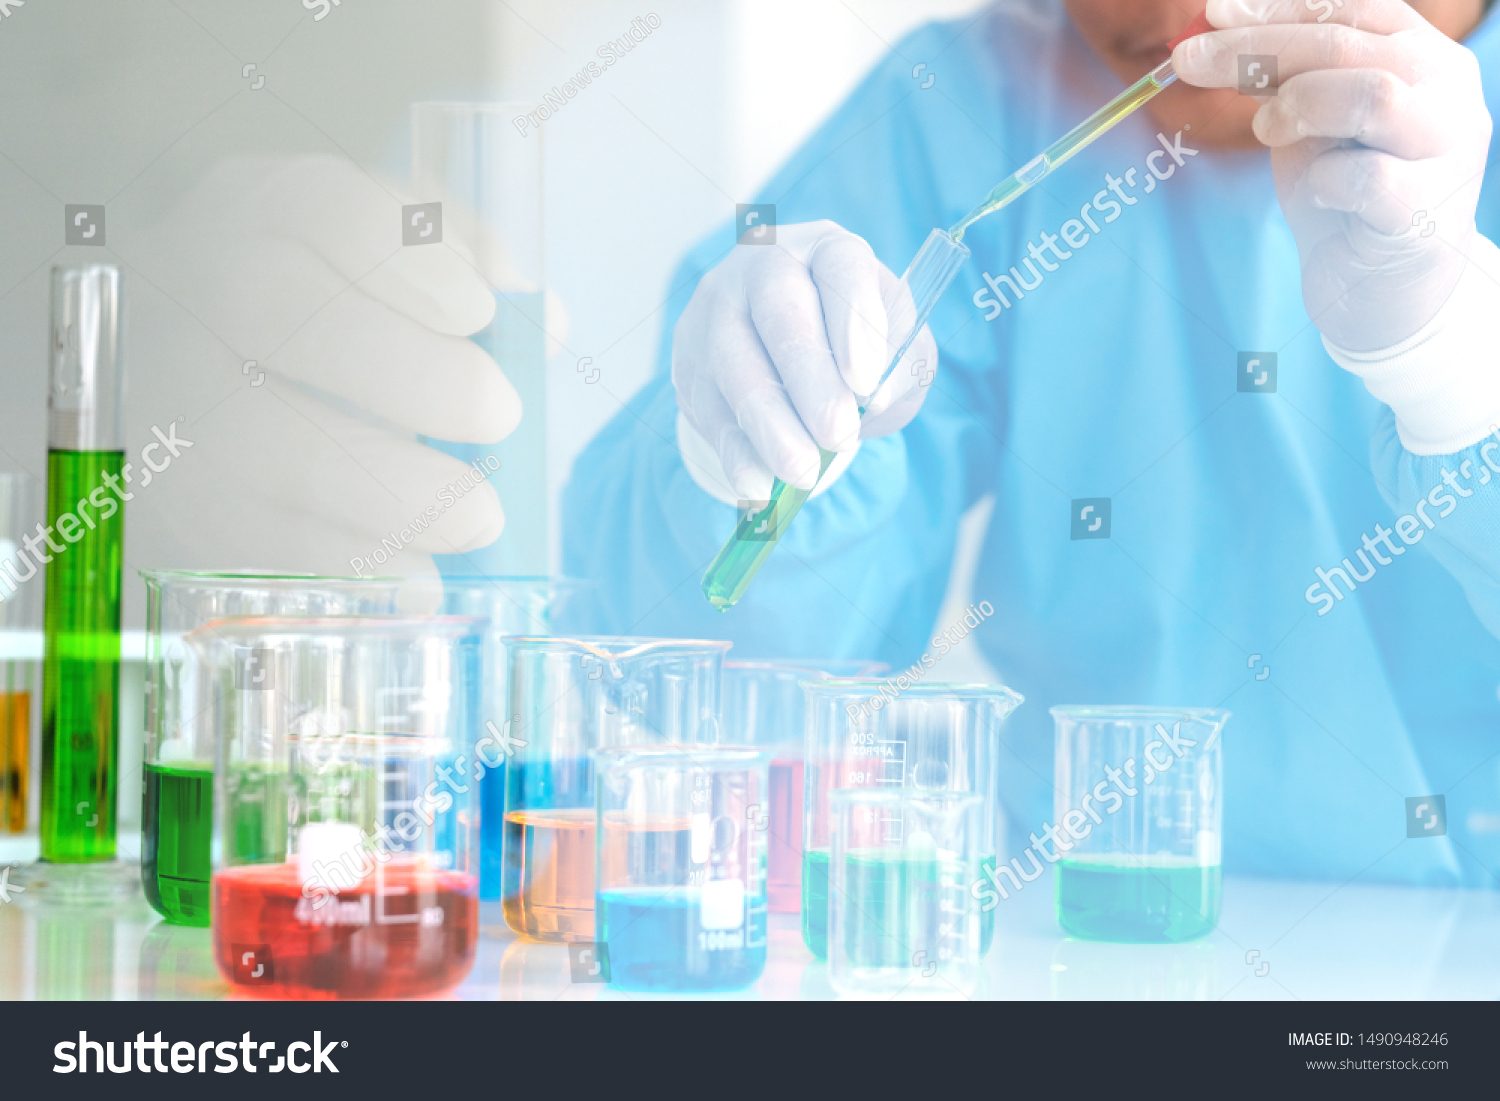 Medical and science researching concept. Scientist is using pipet during the researching. #1490948246